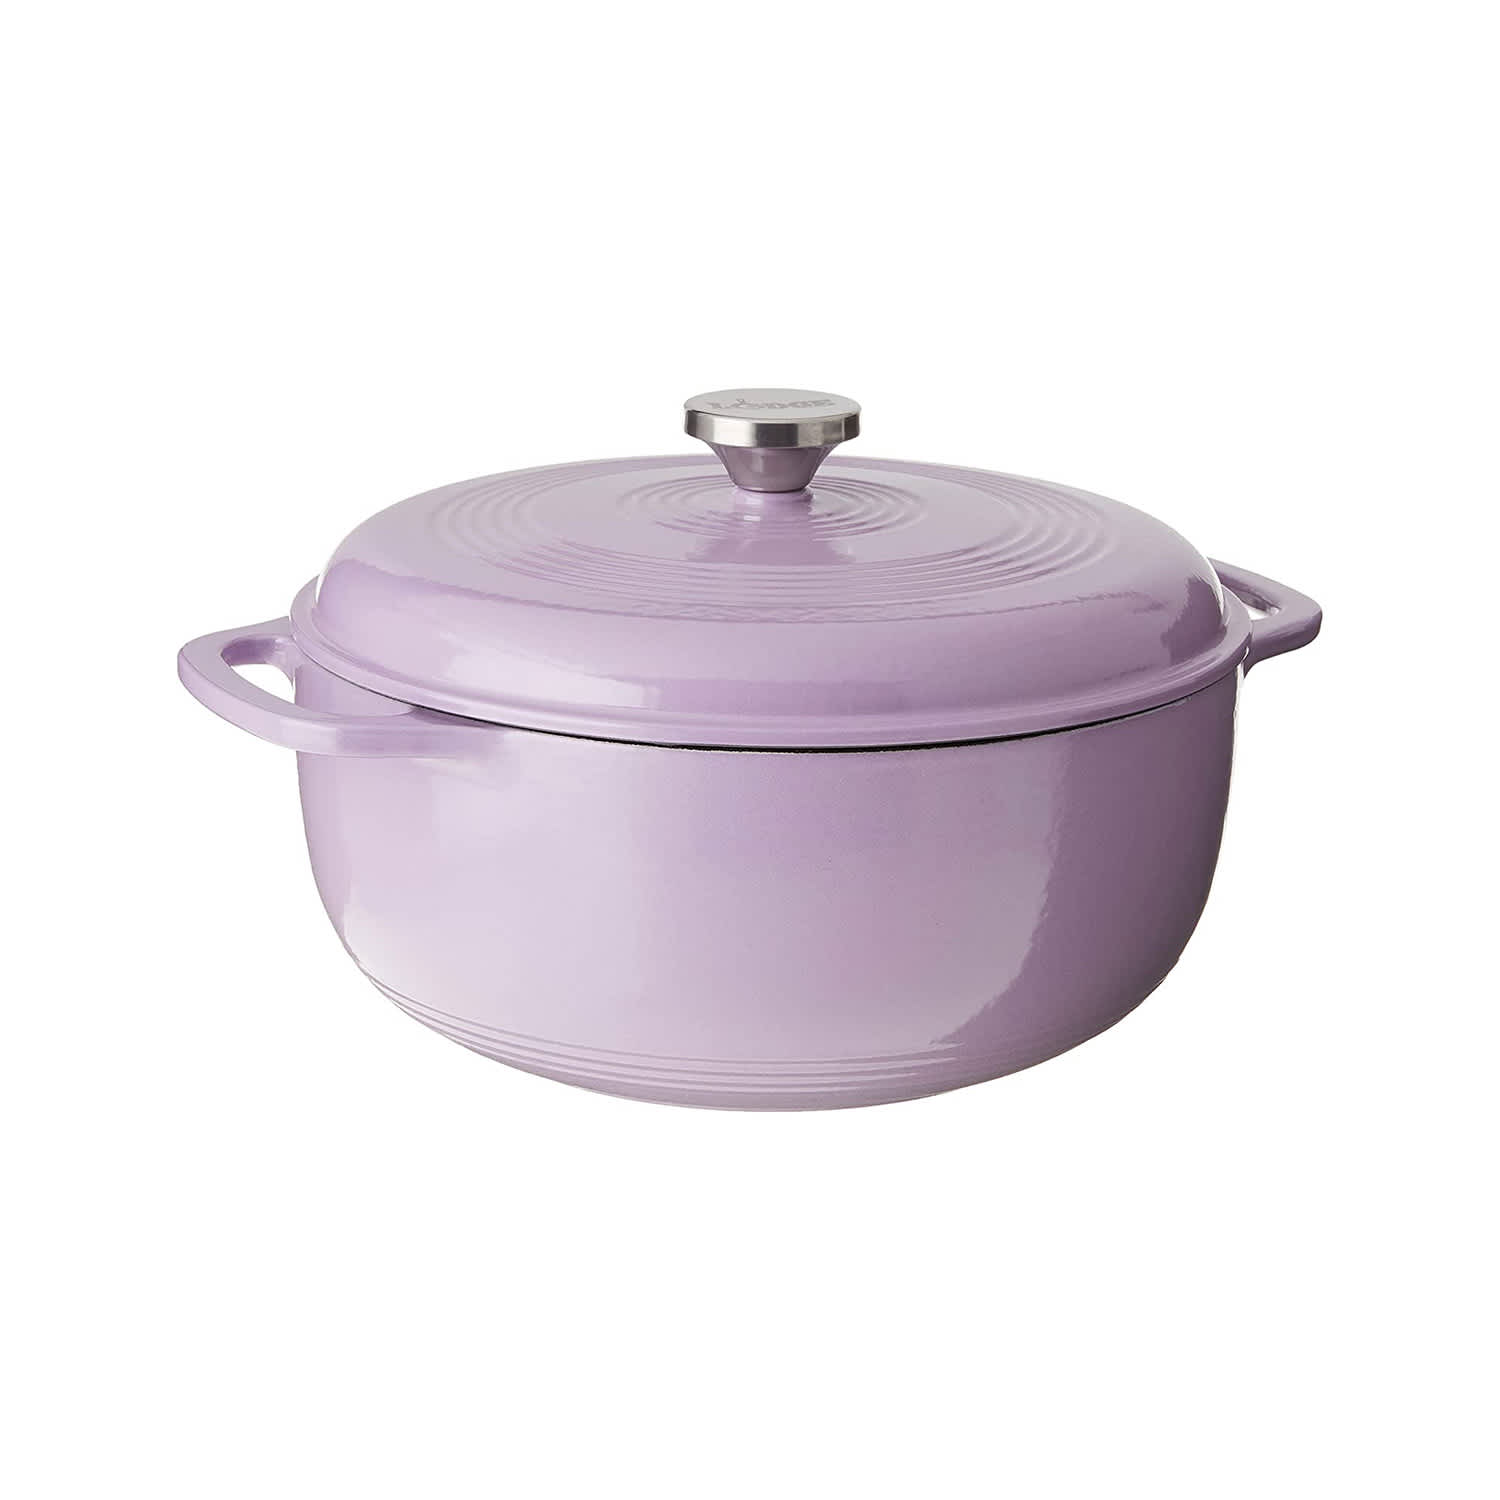 https://cdn.apartmenttherapy.info/image/upload/v1685741213/at/shopping/2023-06/essential-cookware/lodge-enameled-dutch-oven.jpg